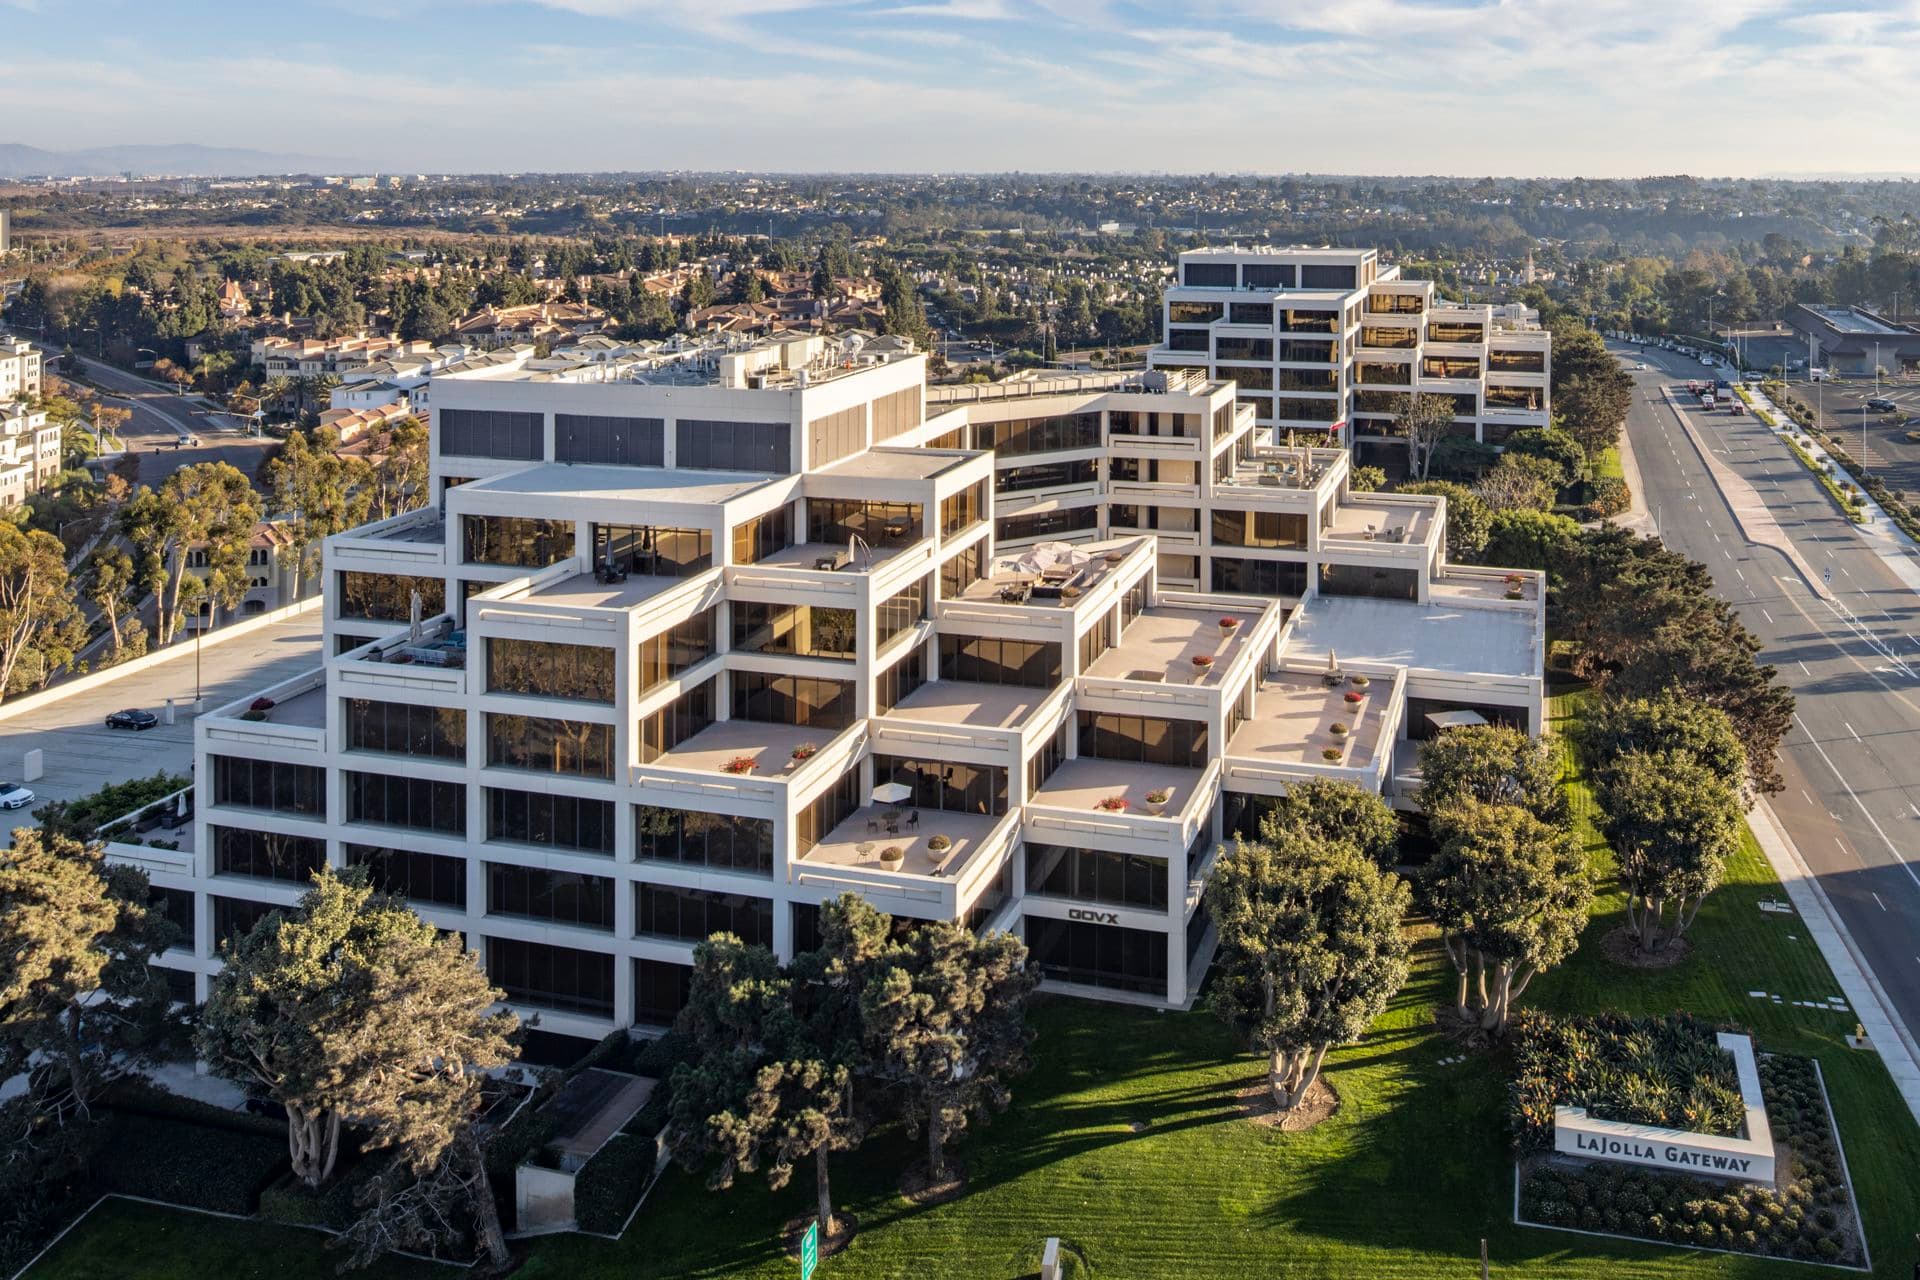 Aerial view of 9191 Towne Centre Drive at La Jolla Gateway in San Diego, CA.